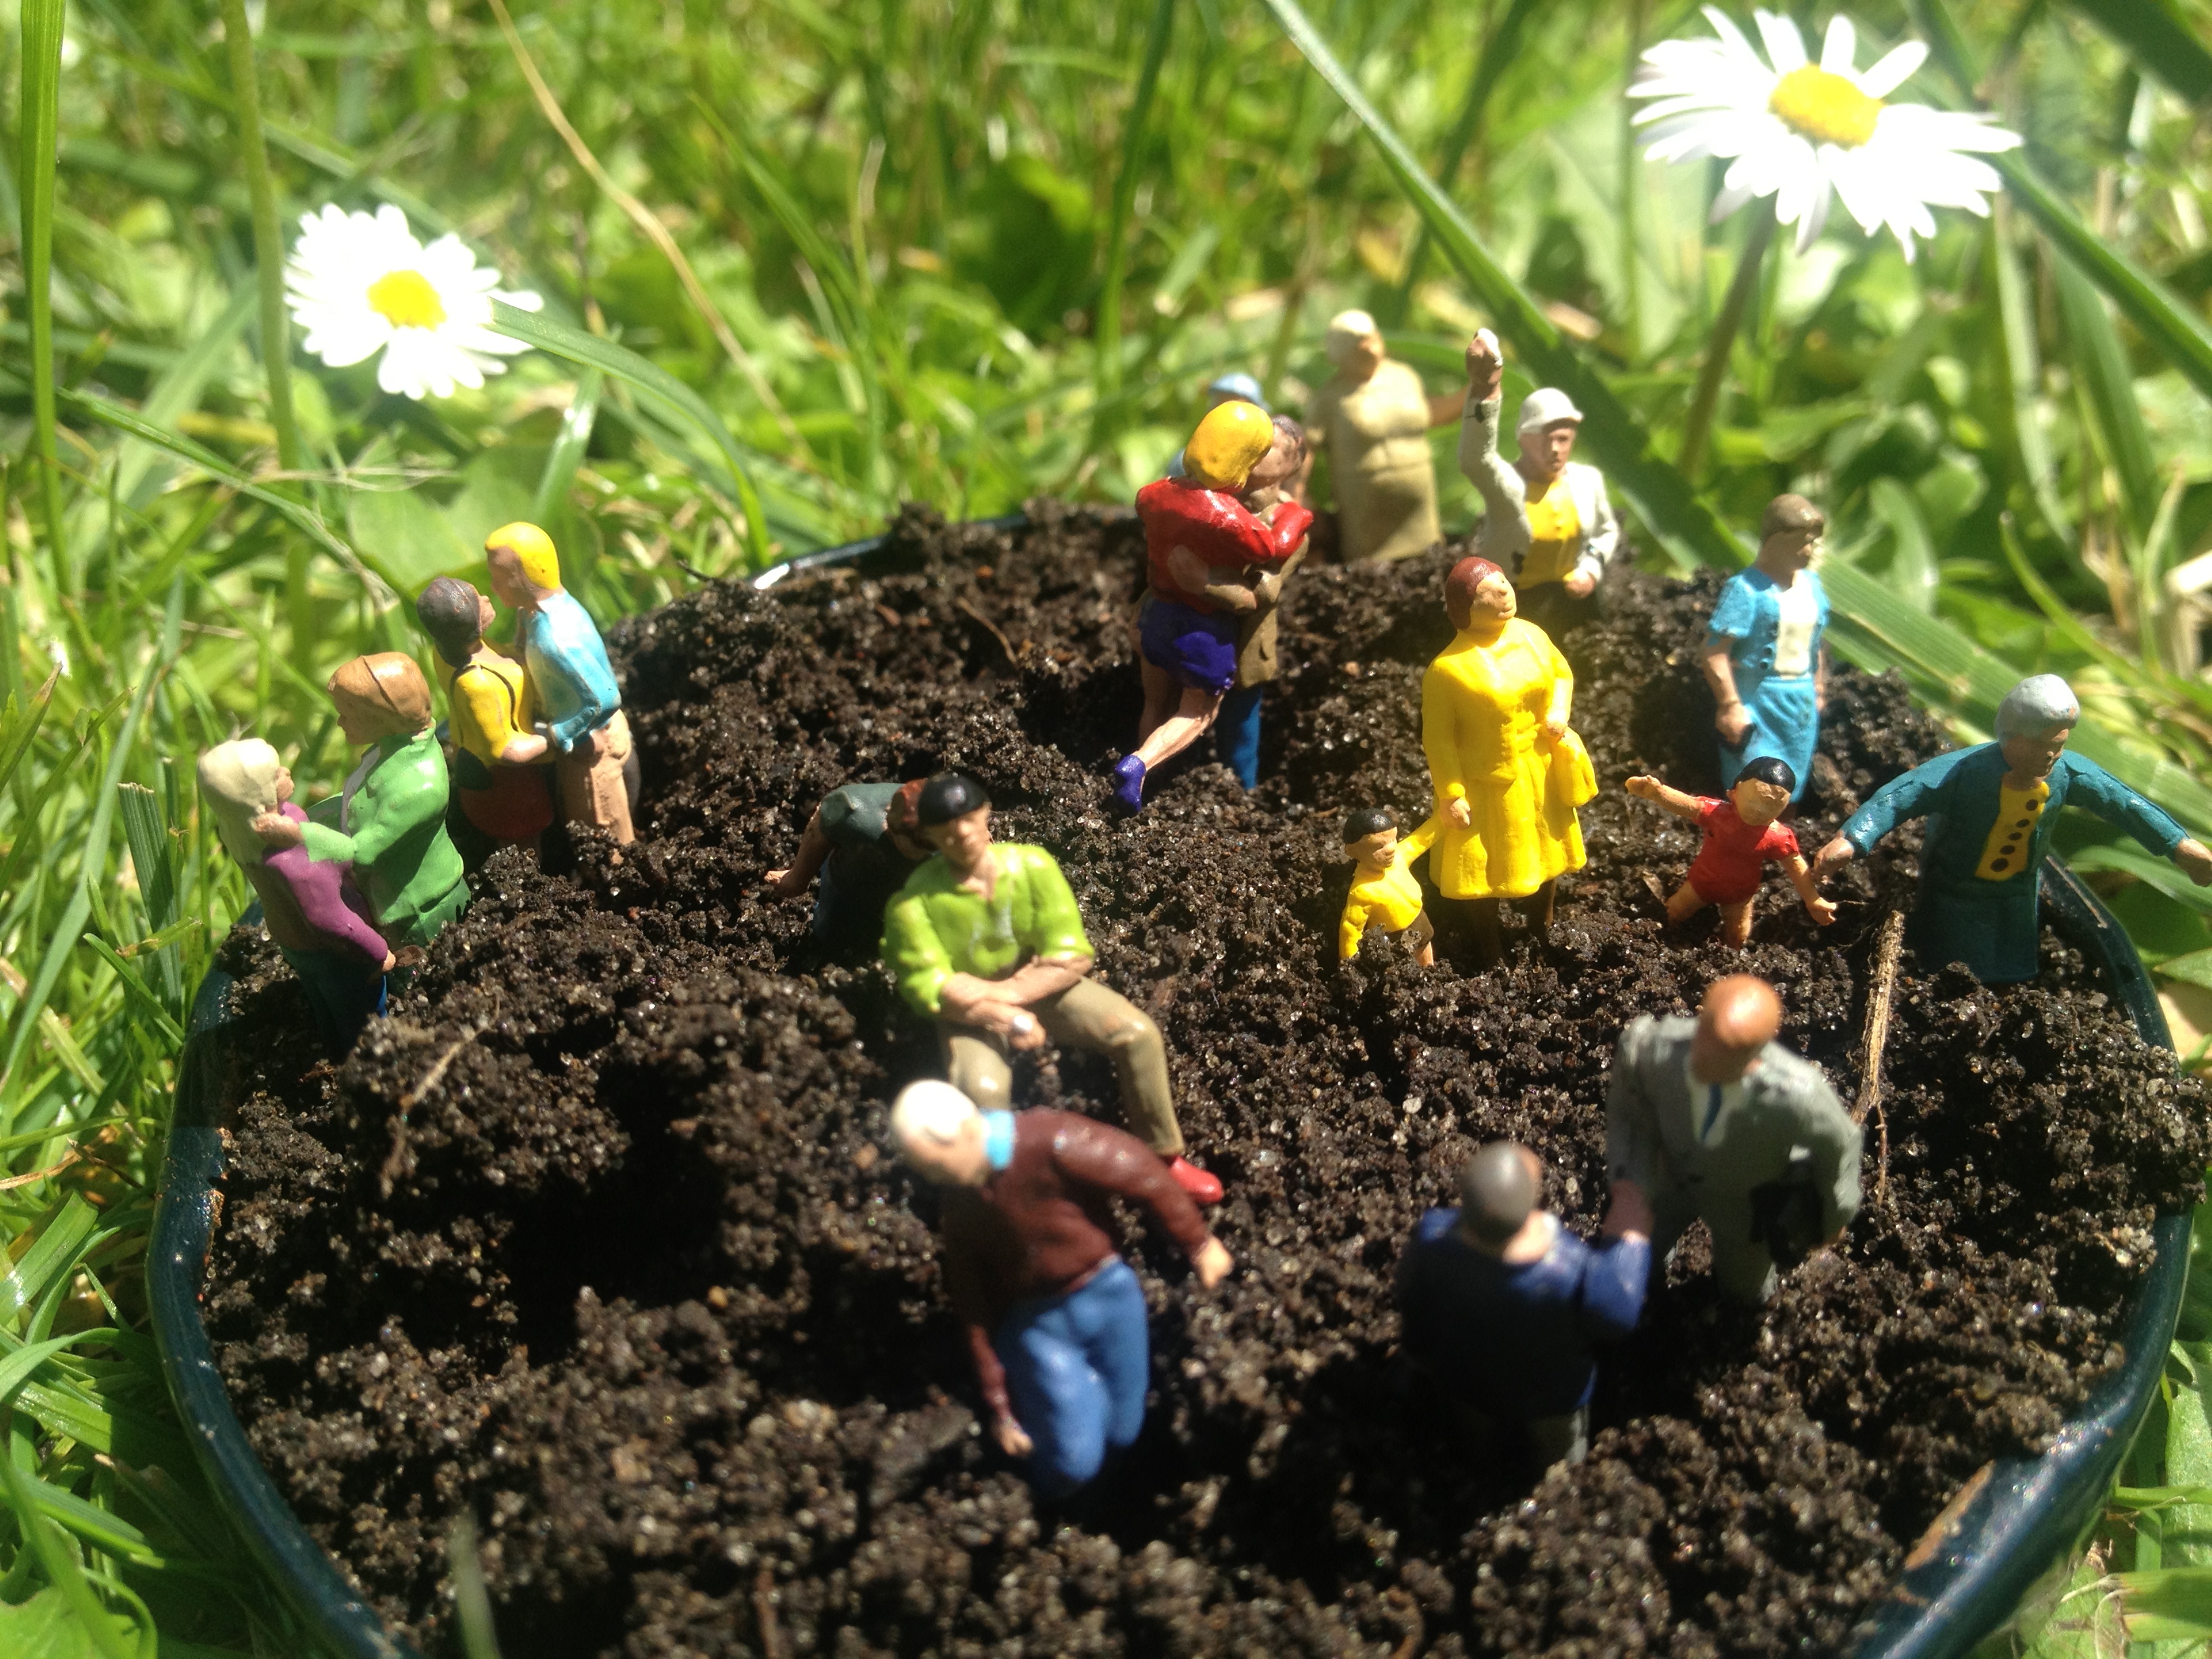 A bucket full of soil on a maedow with various toy figurines